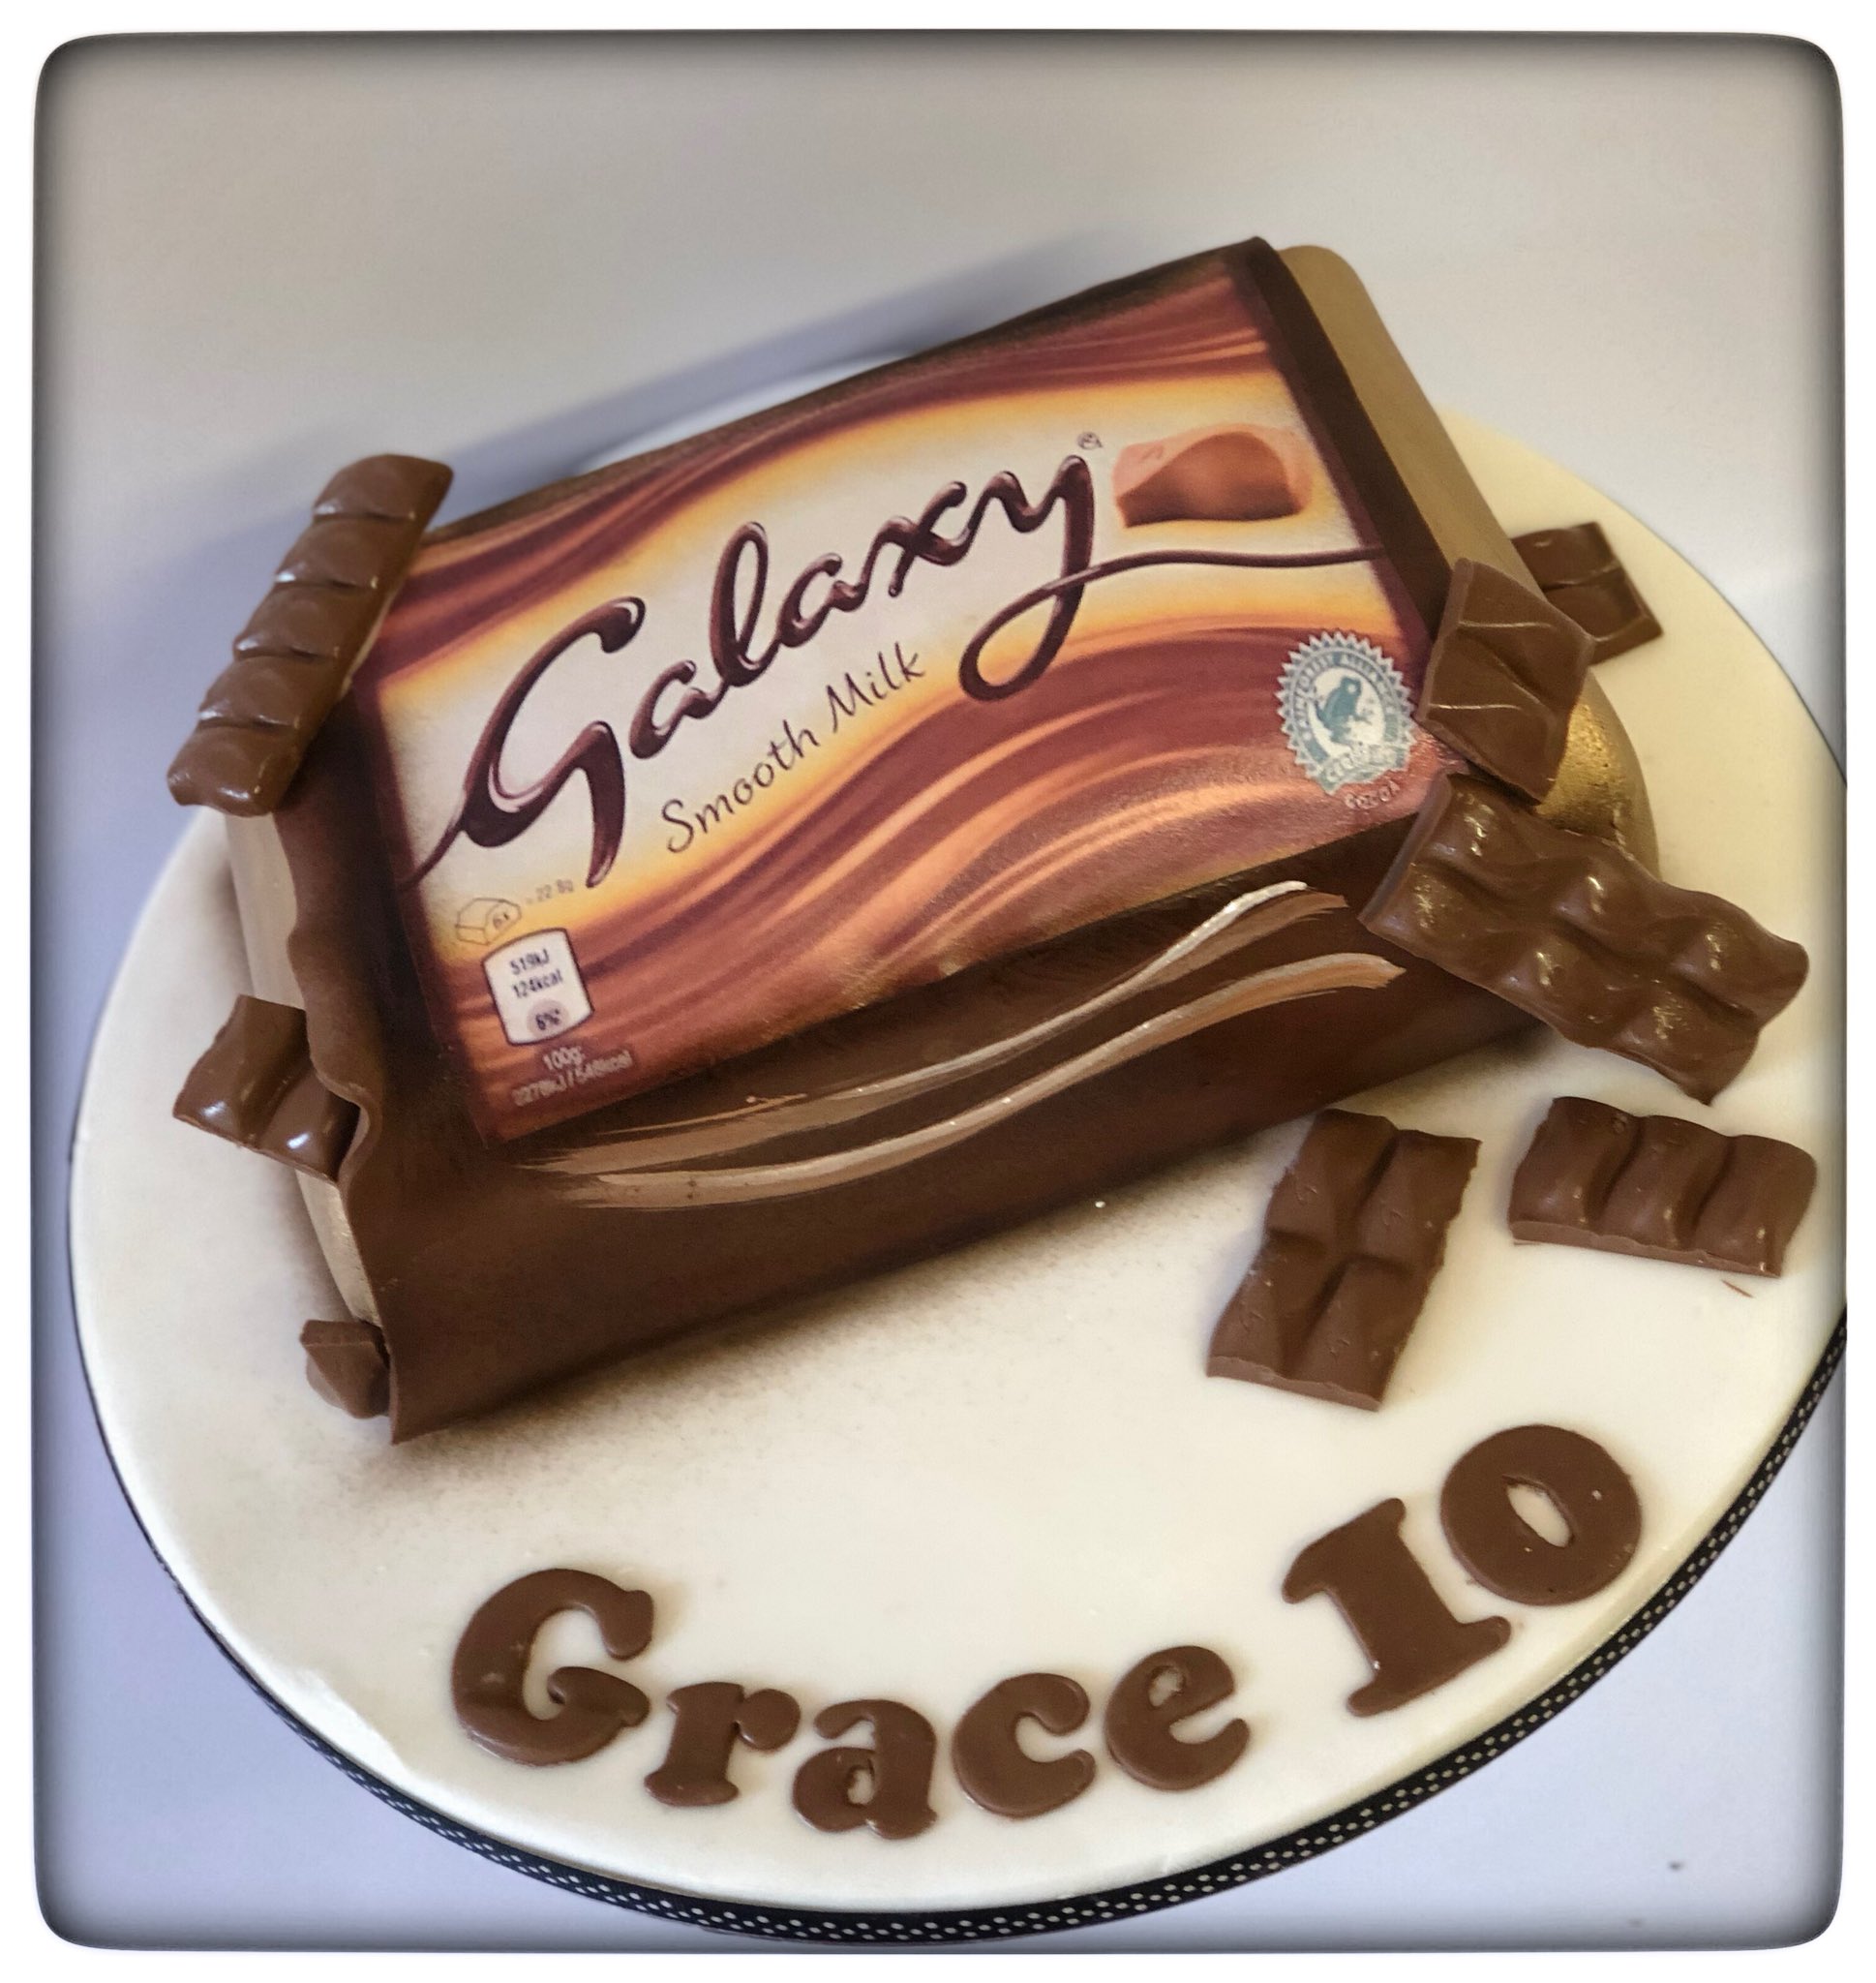 Aggregate more than 68 chocolate bar inspired cakes super hot -  awesomeenglish.edu.vn